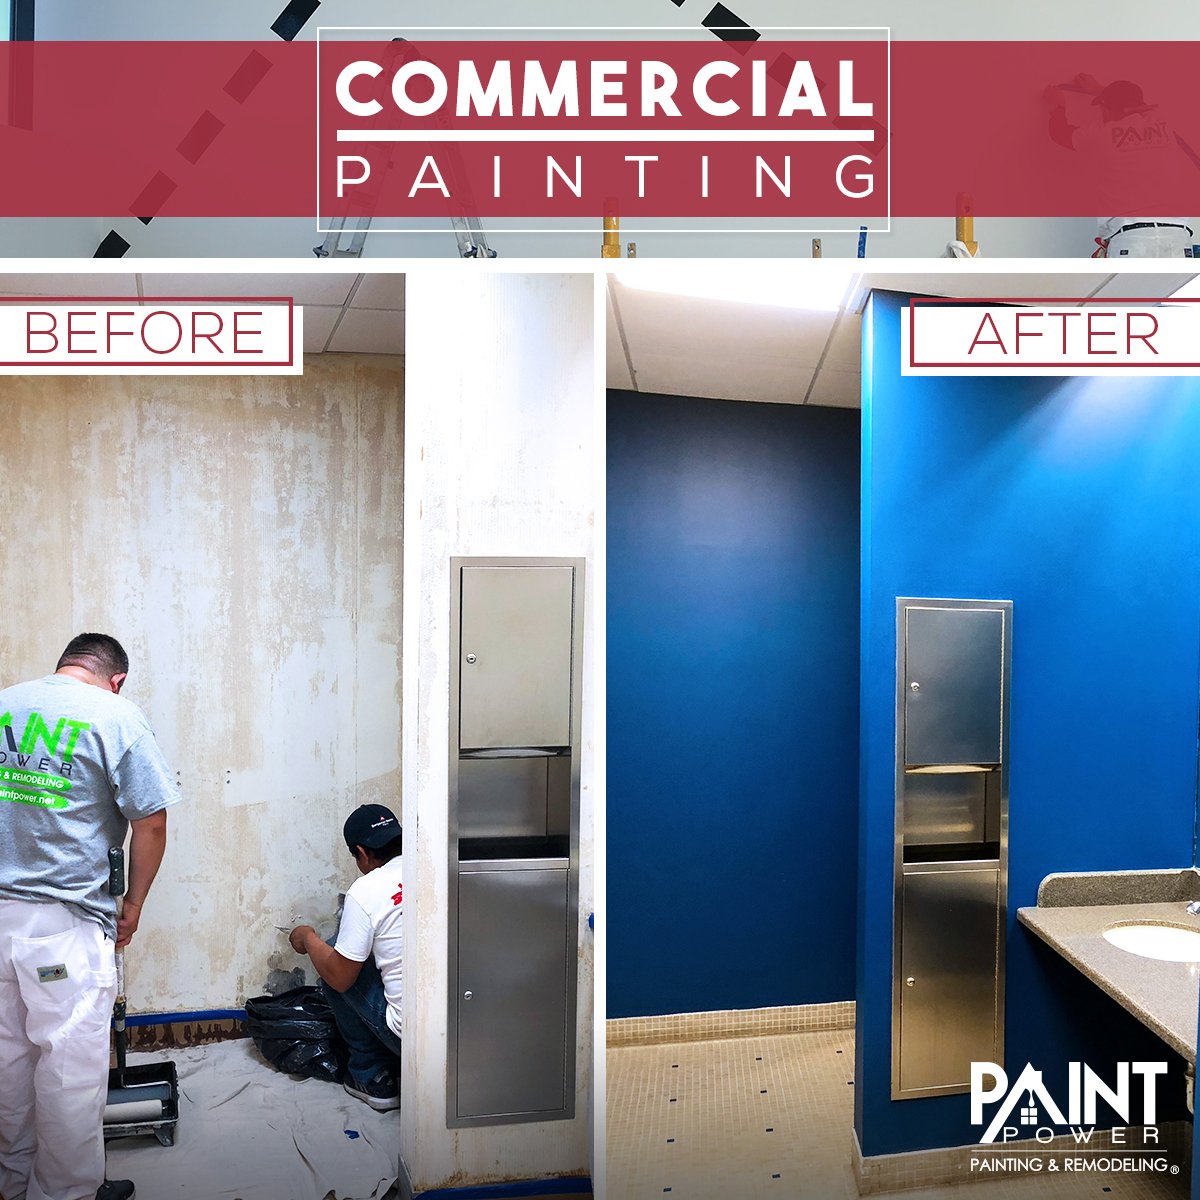 Paint Power On Twitter Give Your Business A Brand New Look